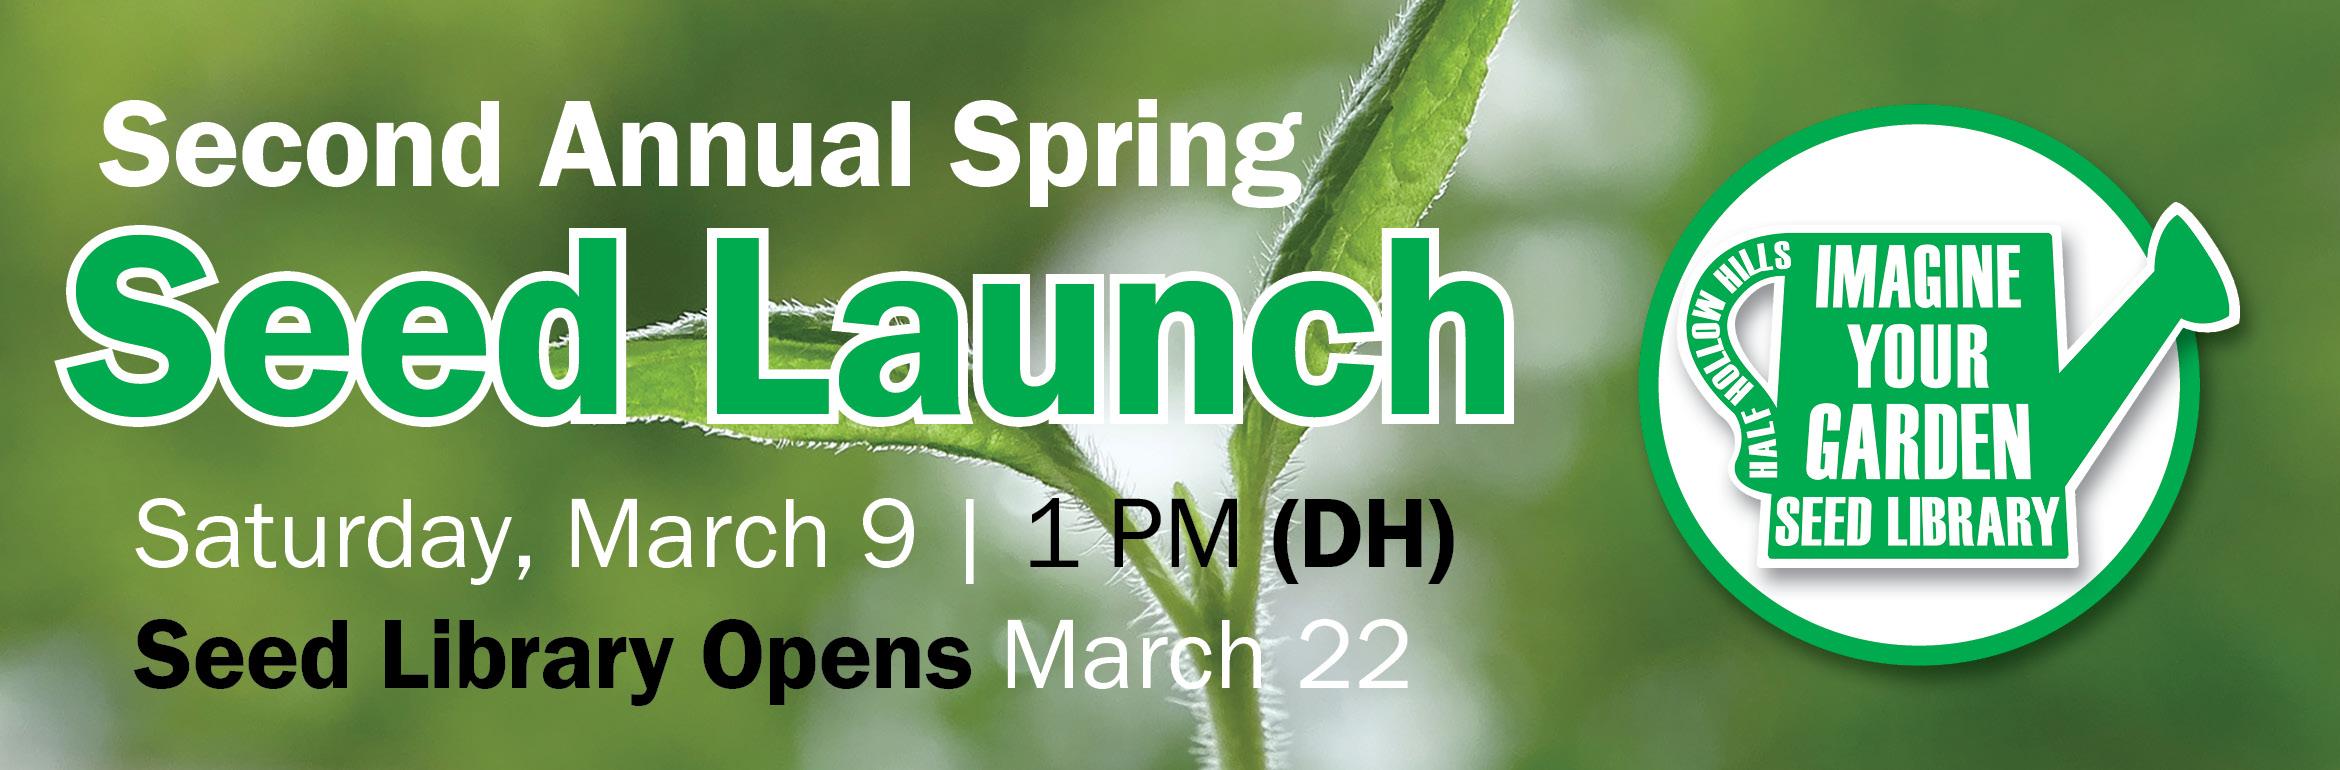 Second Annual Spring Seed Launch. Saturday, March 9 | 1 PM (DH). Seed Library Opens March 22.